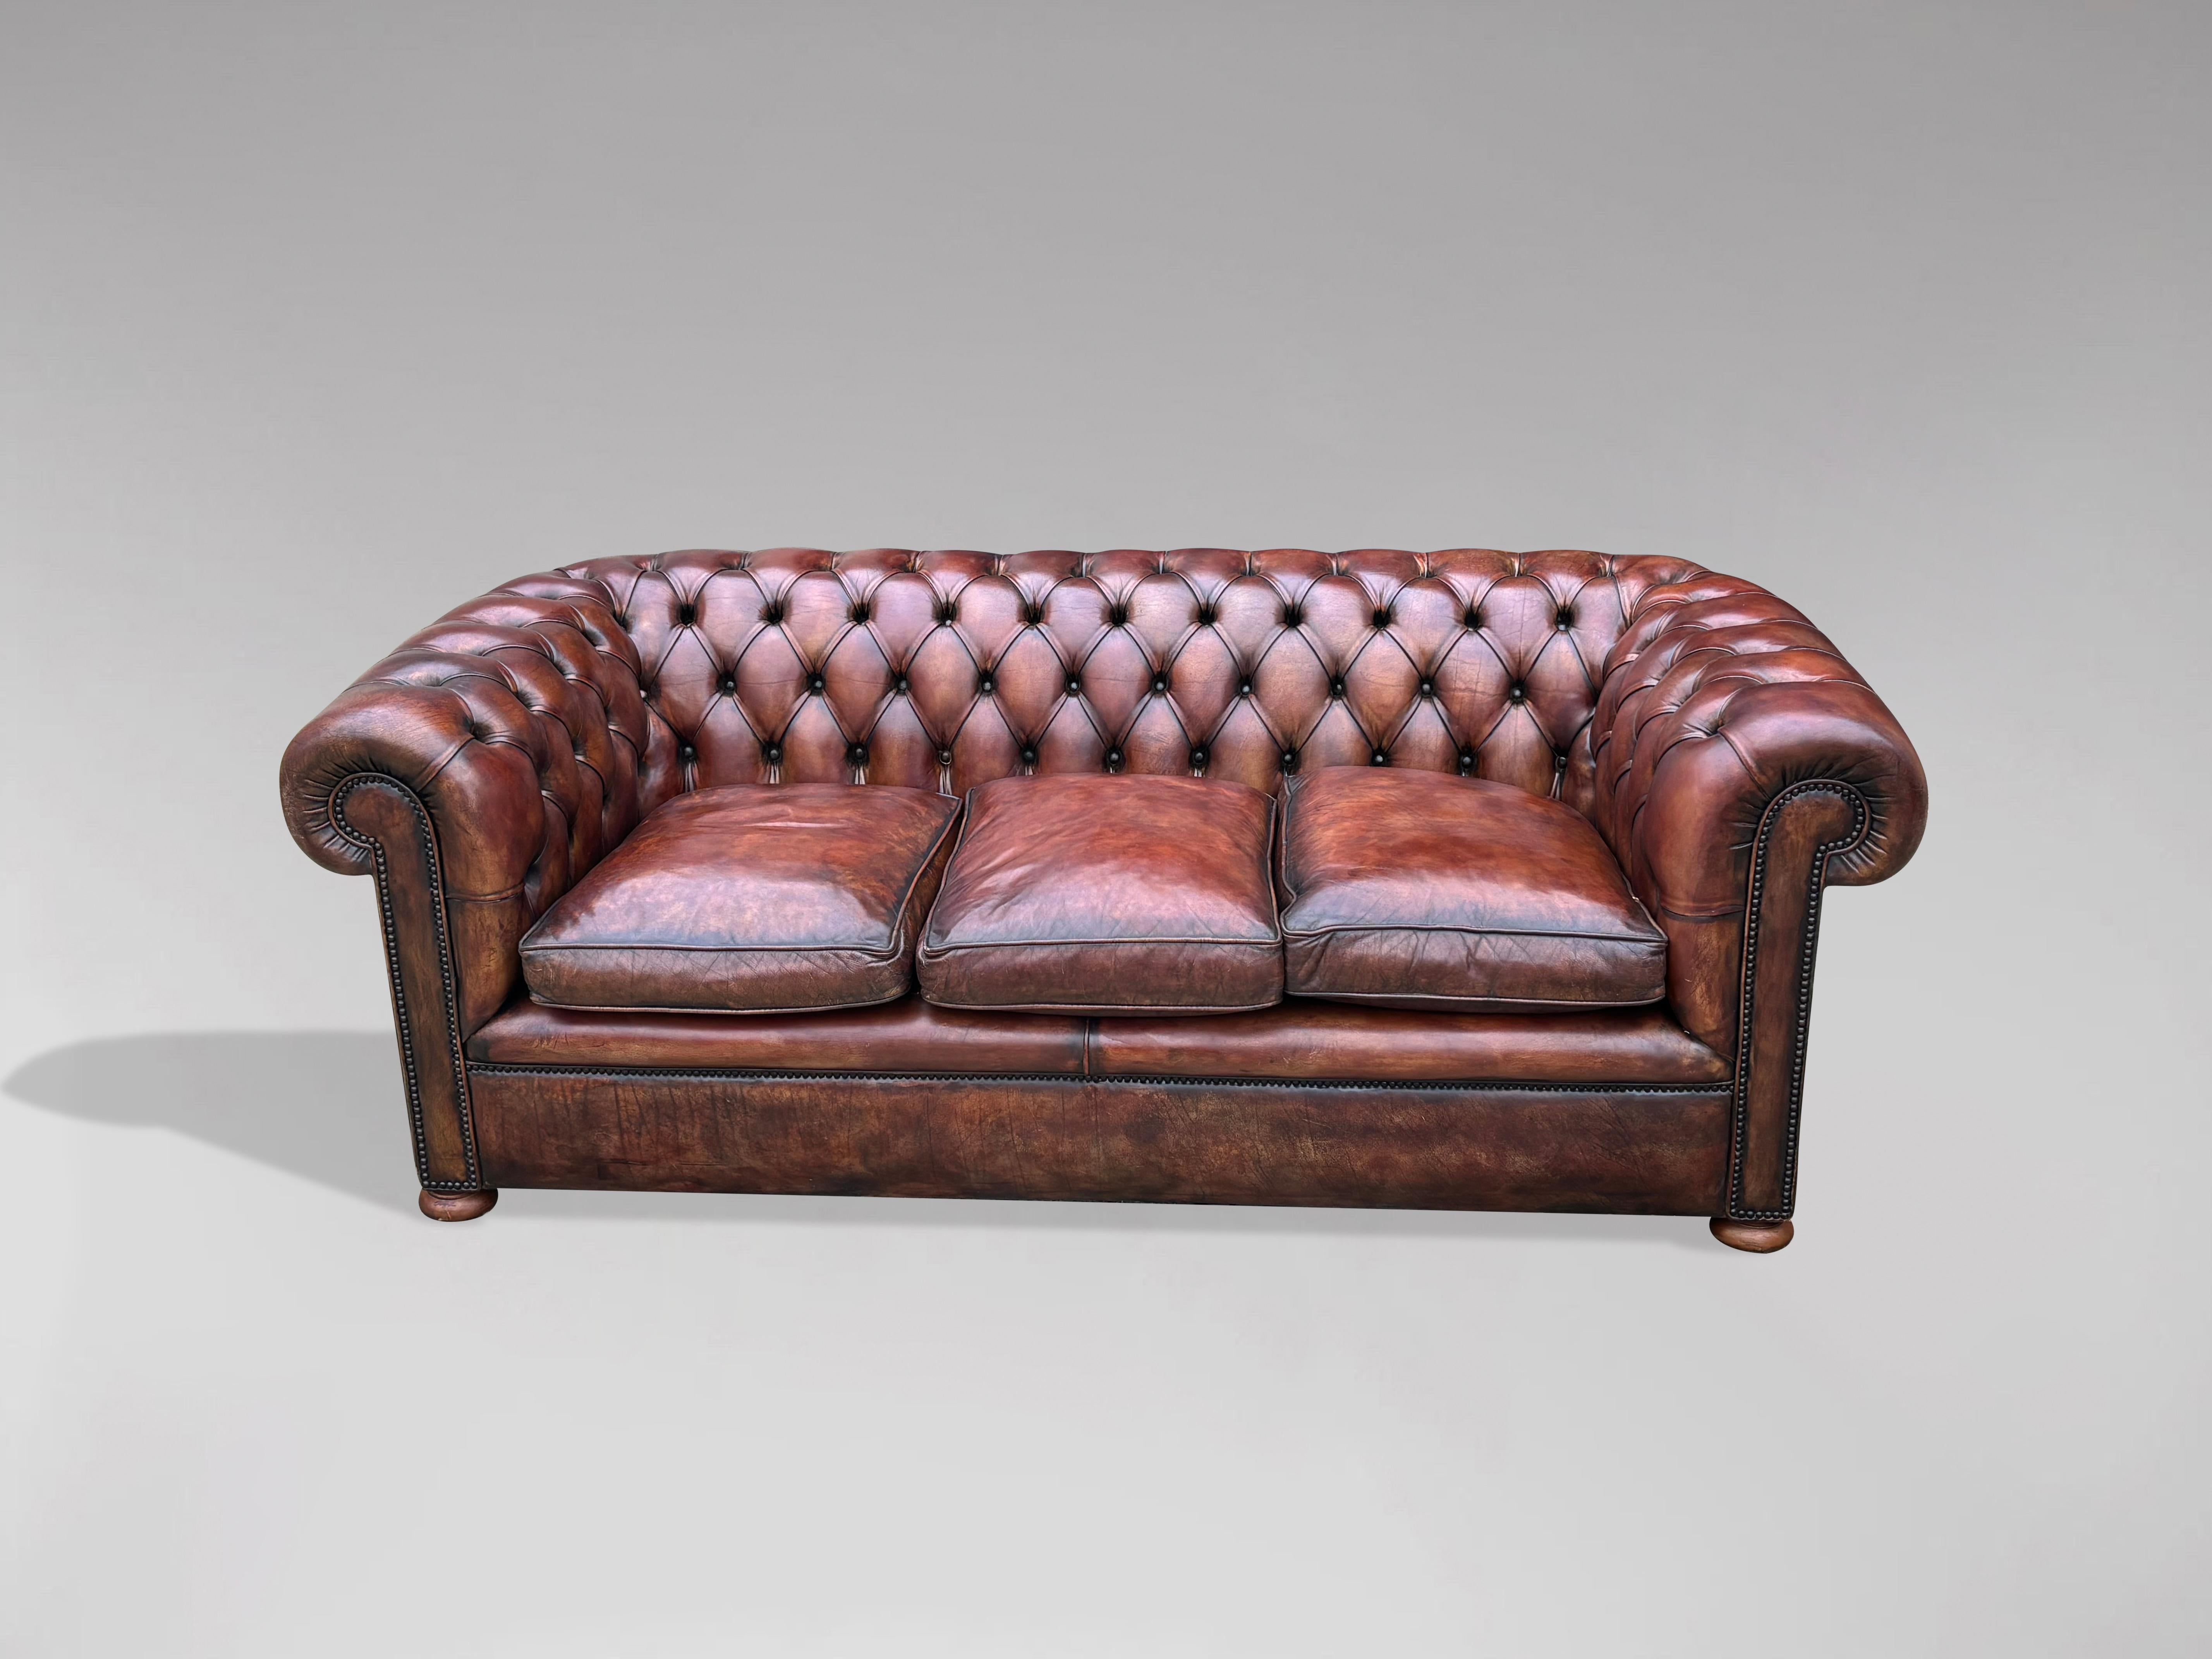 Stunning Quality 3 Seater Brown Leather Chesterfield Sofa In Excellent Condition In Petworth,West Sussex, GB